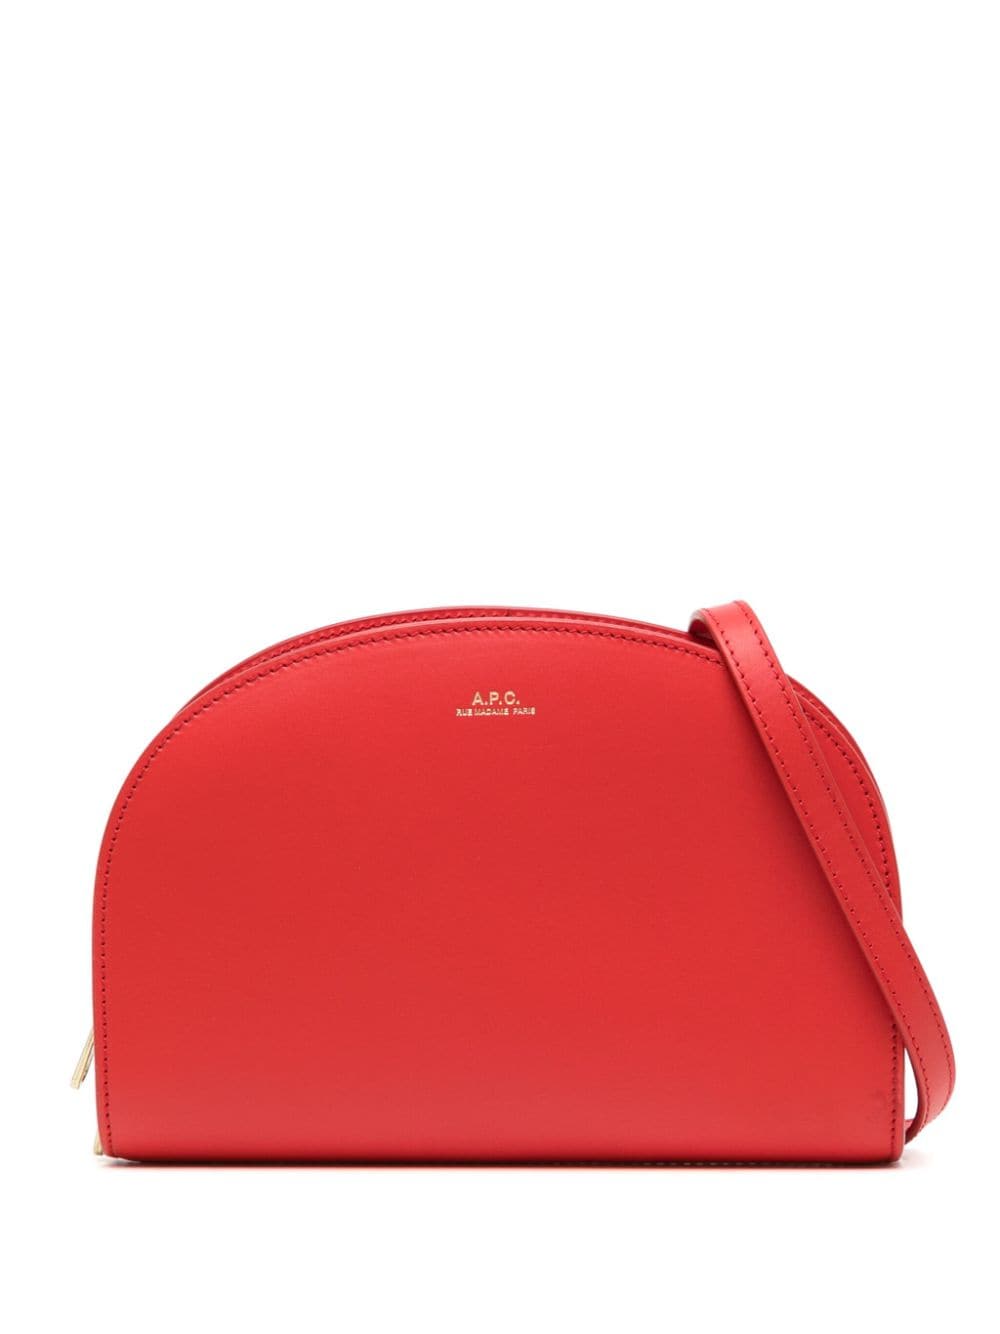 Apc Demi-lune Leather Crossbody Bag In Red